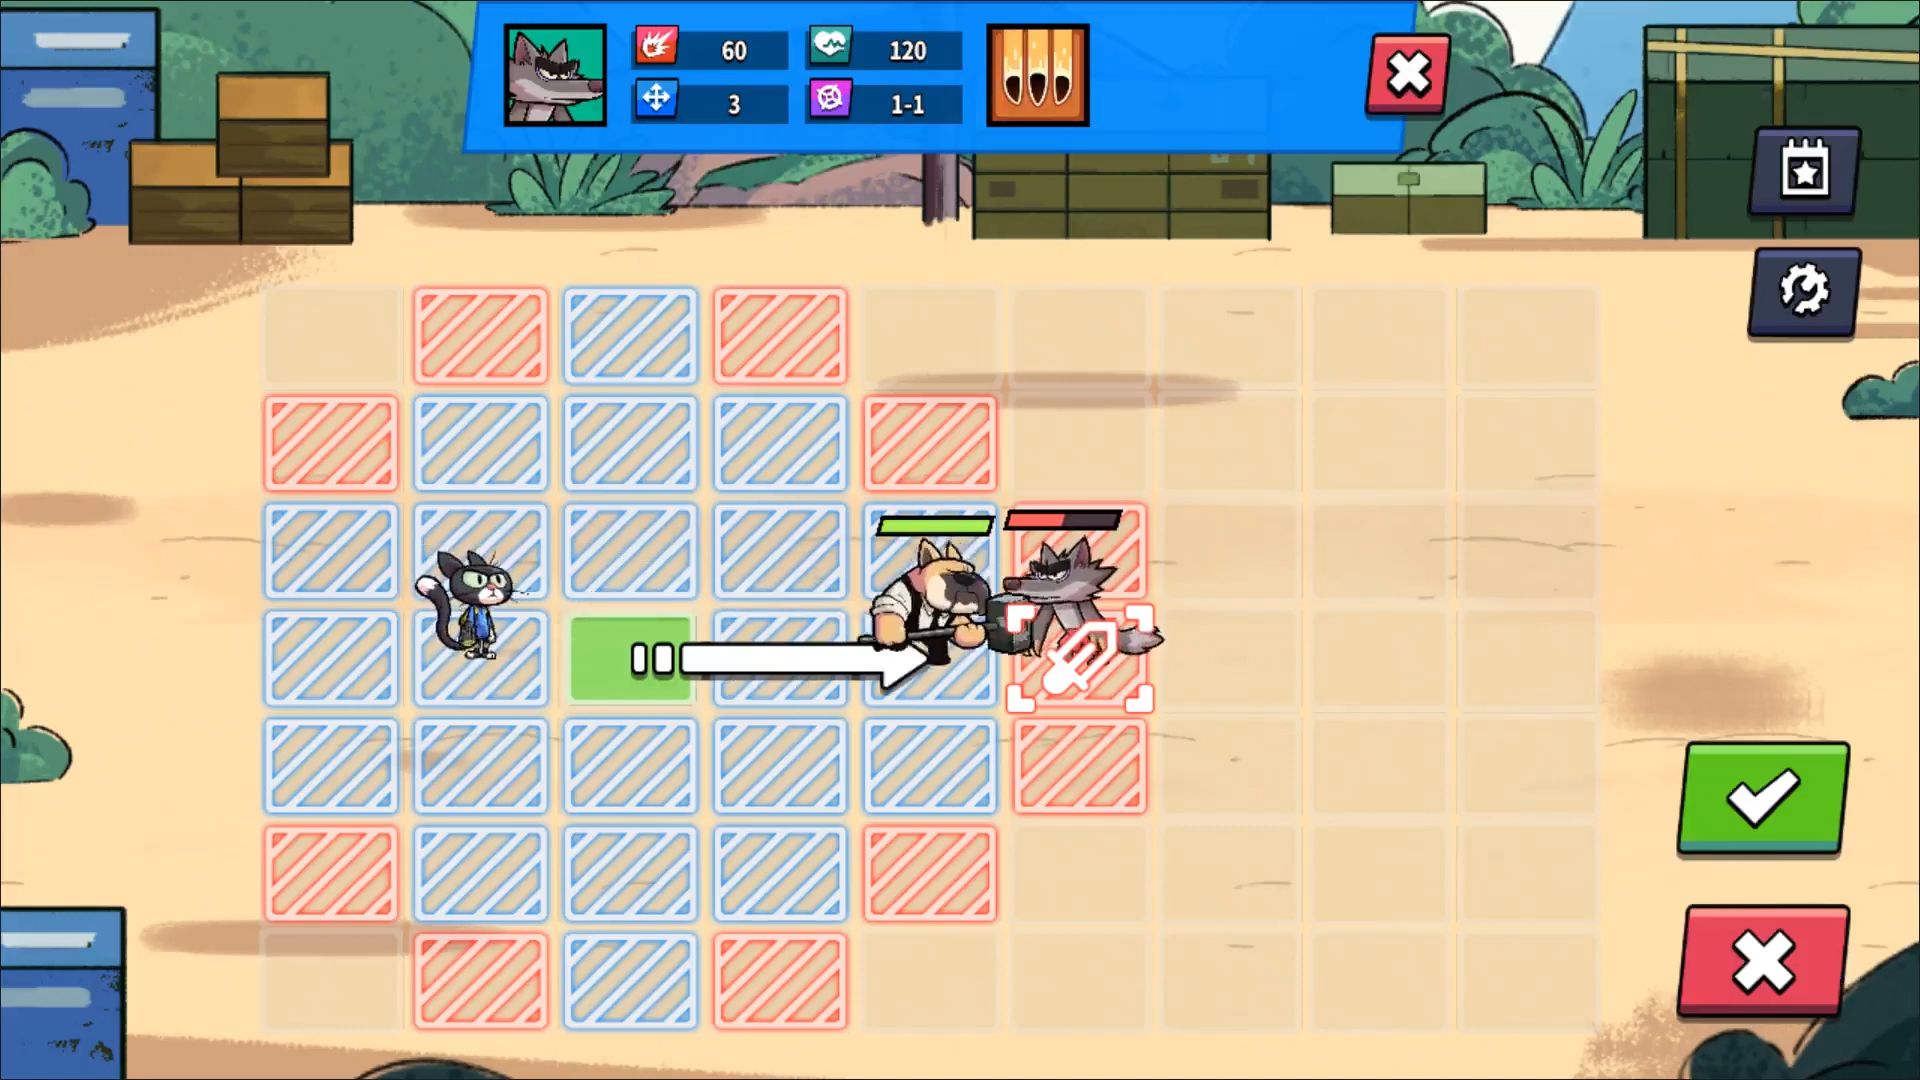 Full version of Android TBS (Turn-based strategy) game apk Kumu's Arena for tablet and phone.